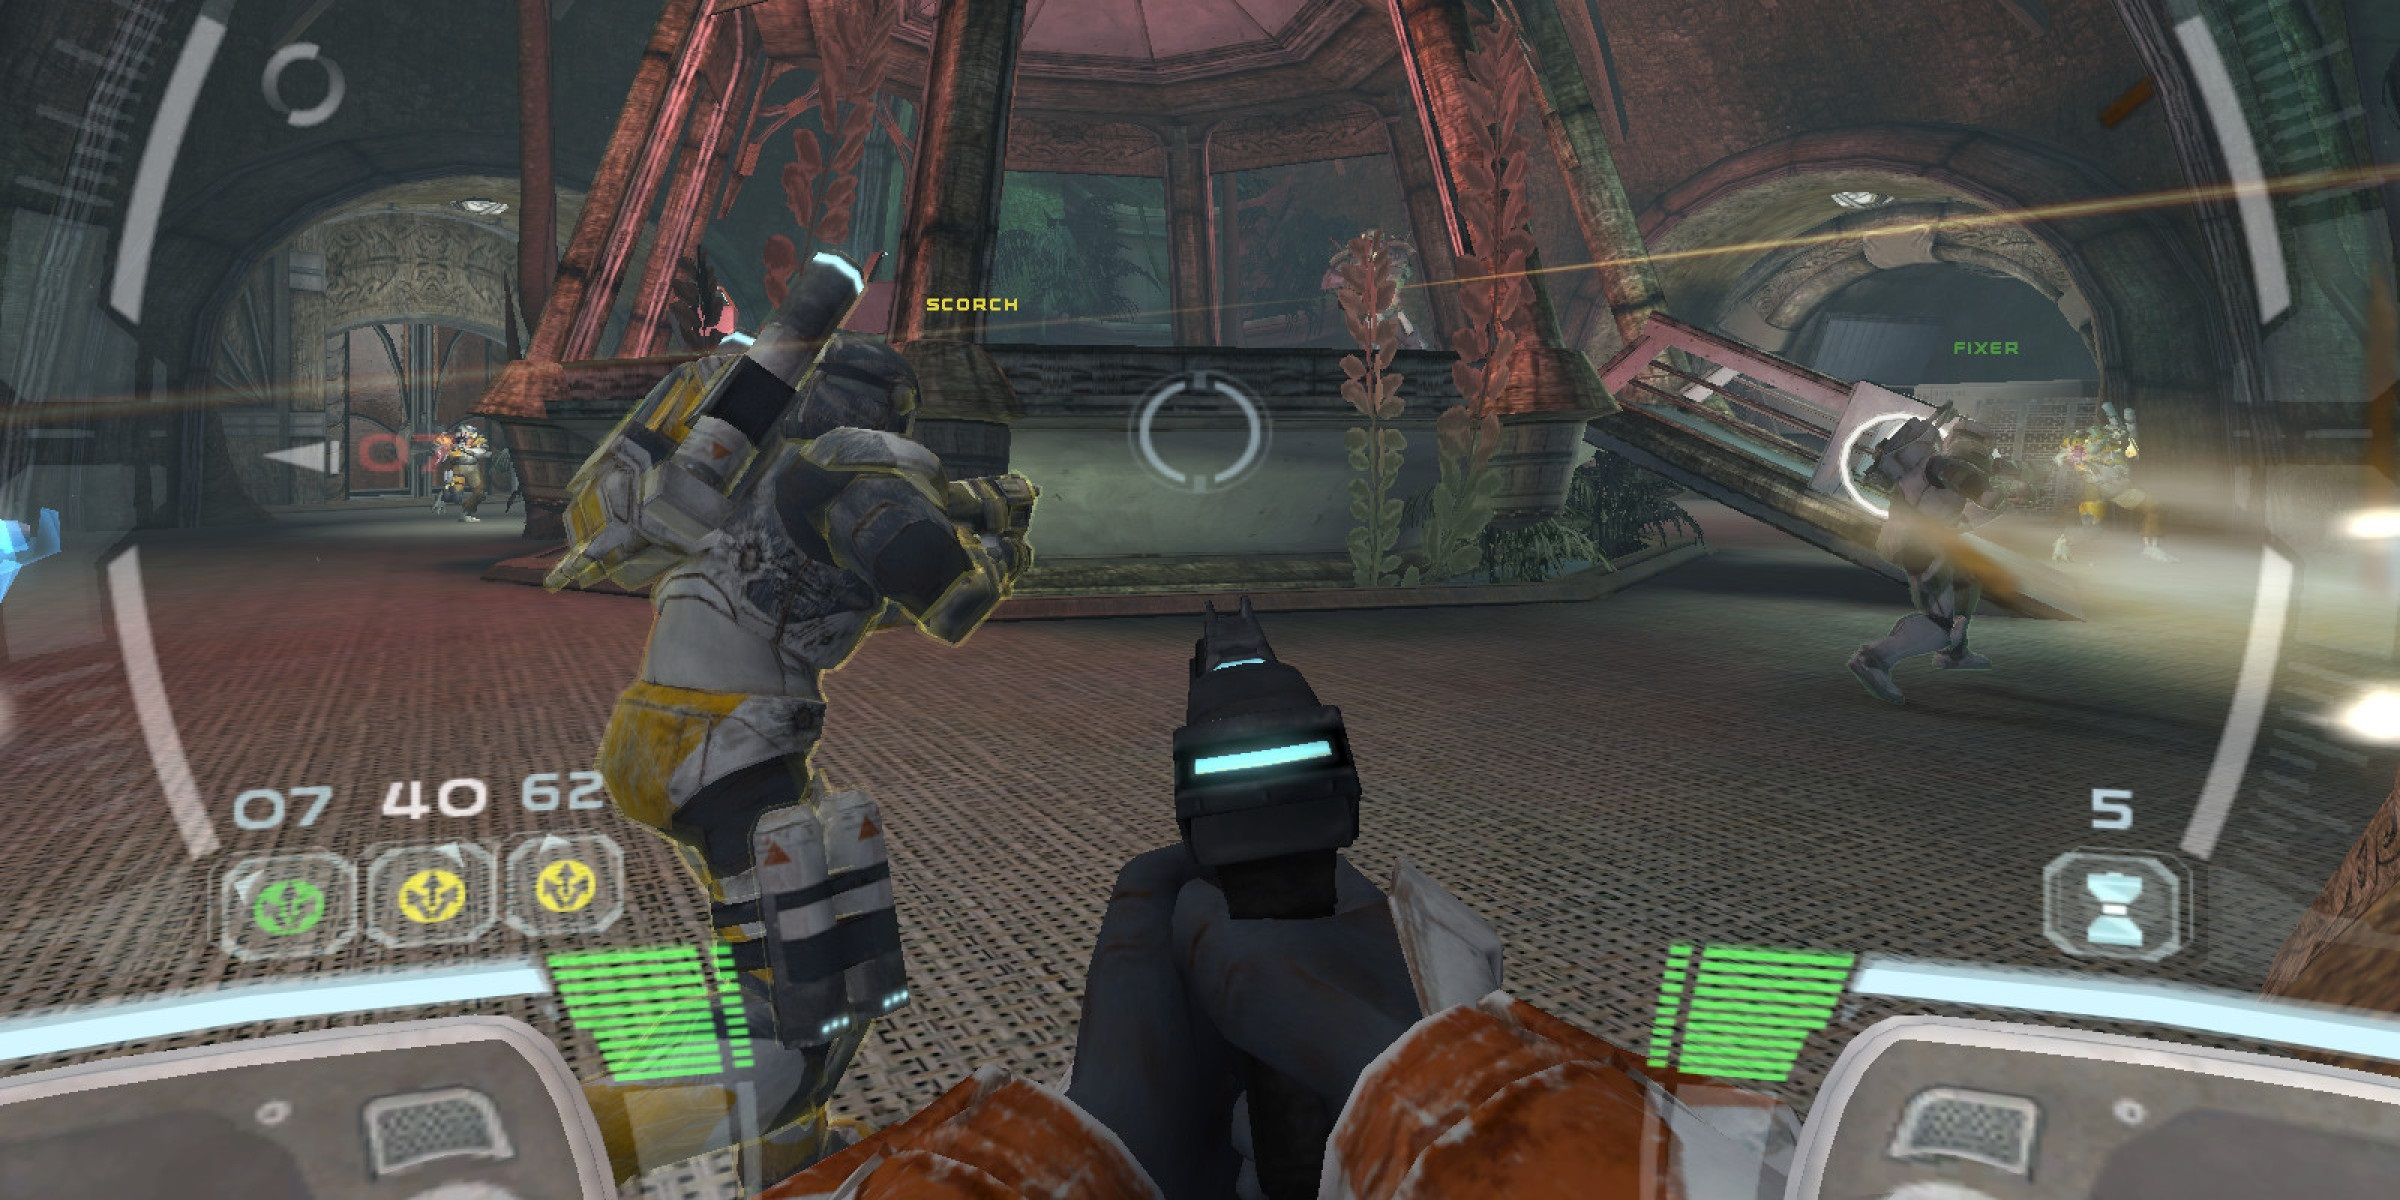 Boss leading his squadmates in gameplay of Star Wars: Republic Commando (2005)